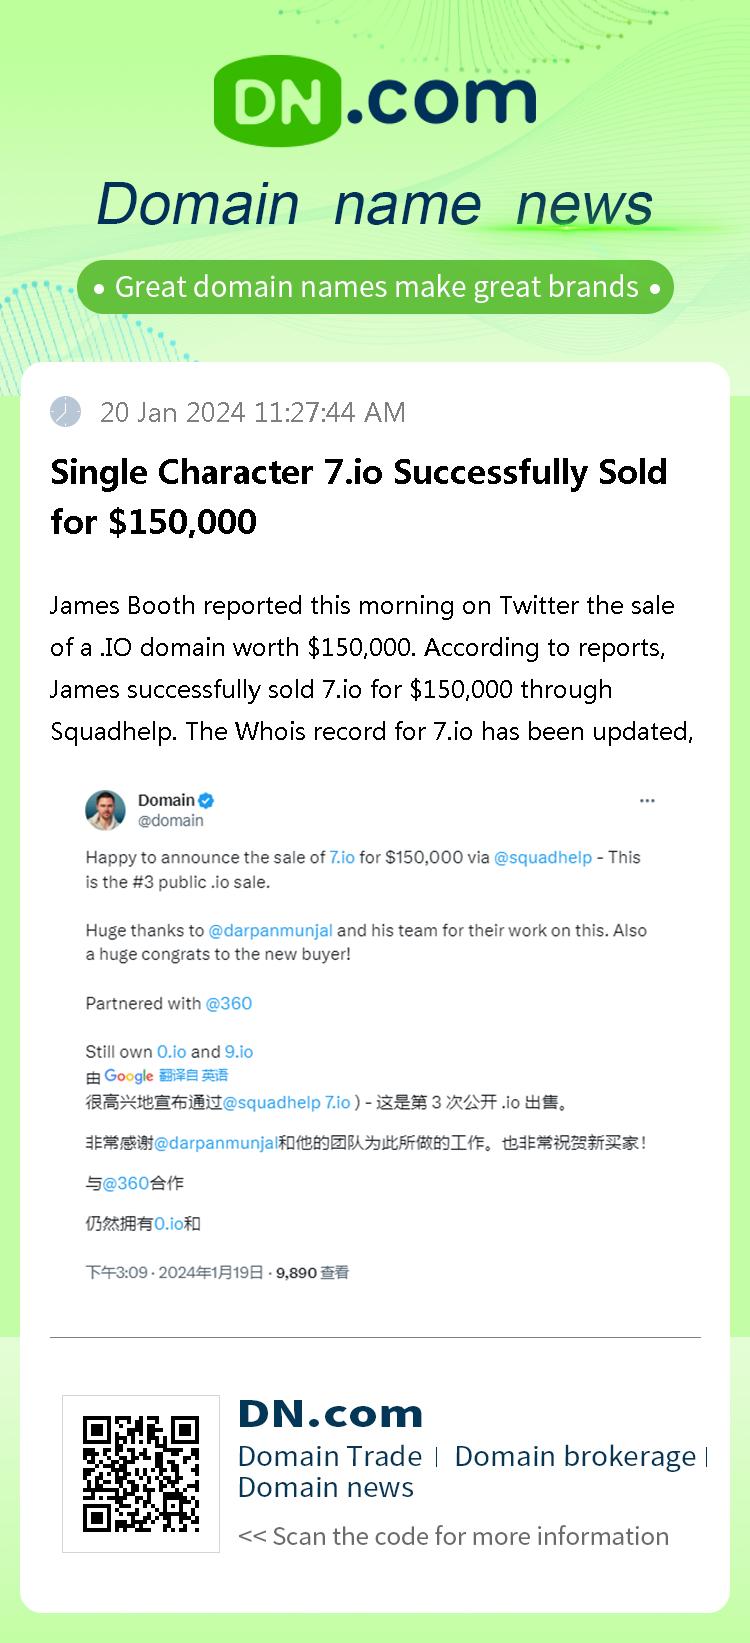 Single Character 7.io Successfully Sold for $150,000